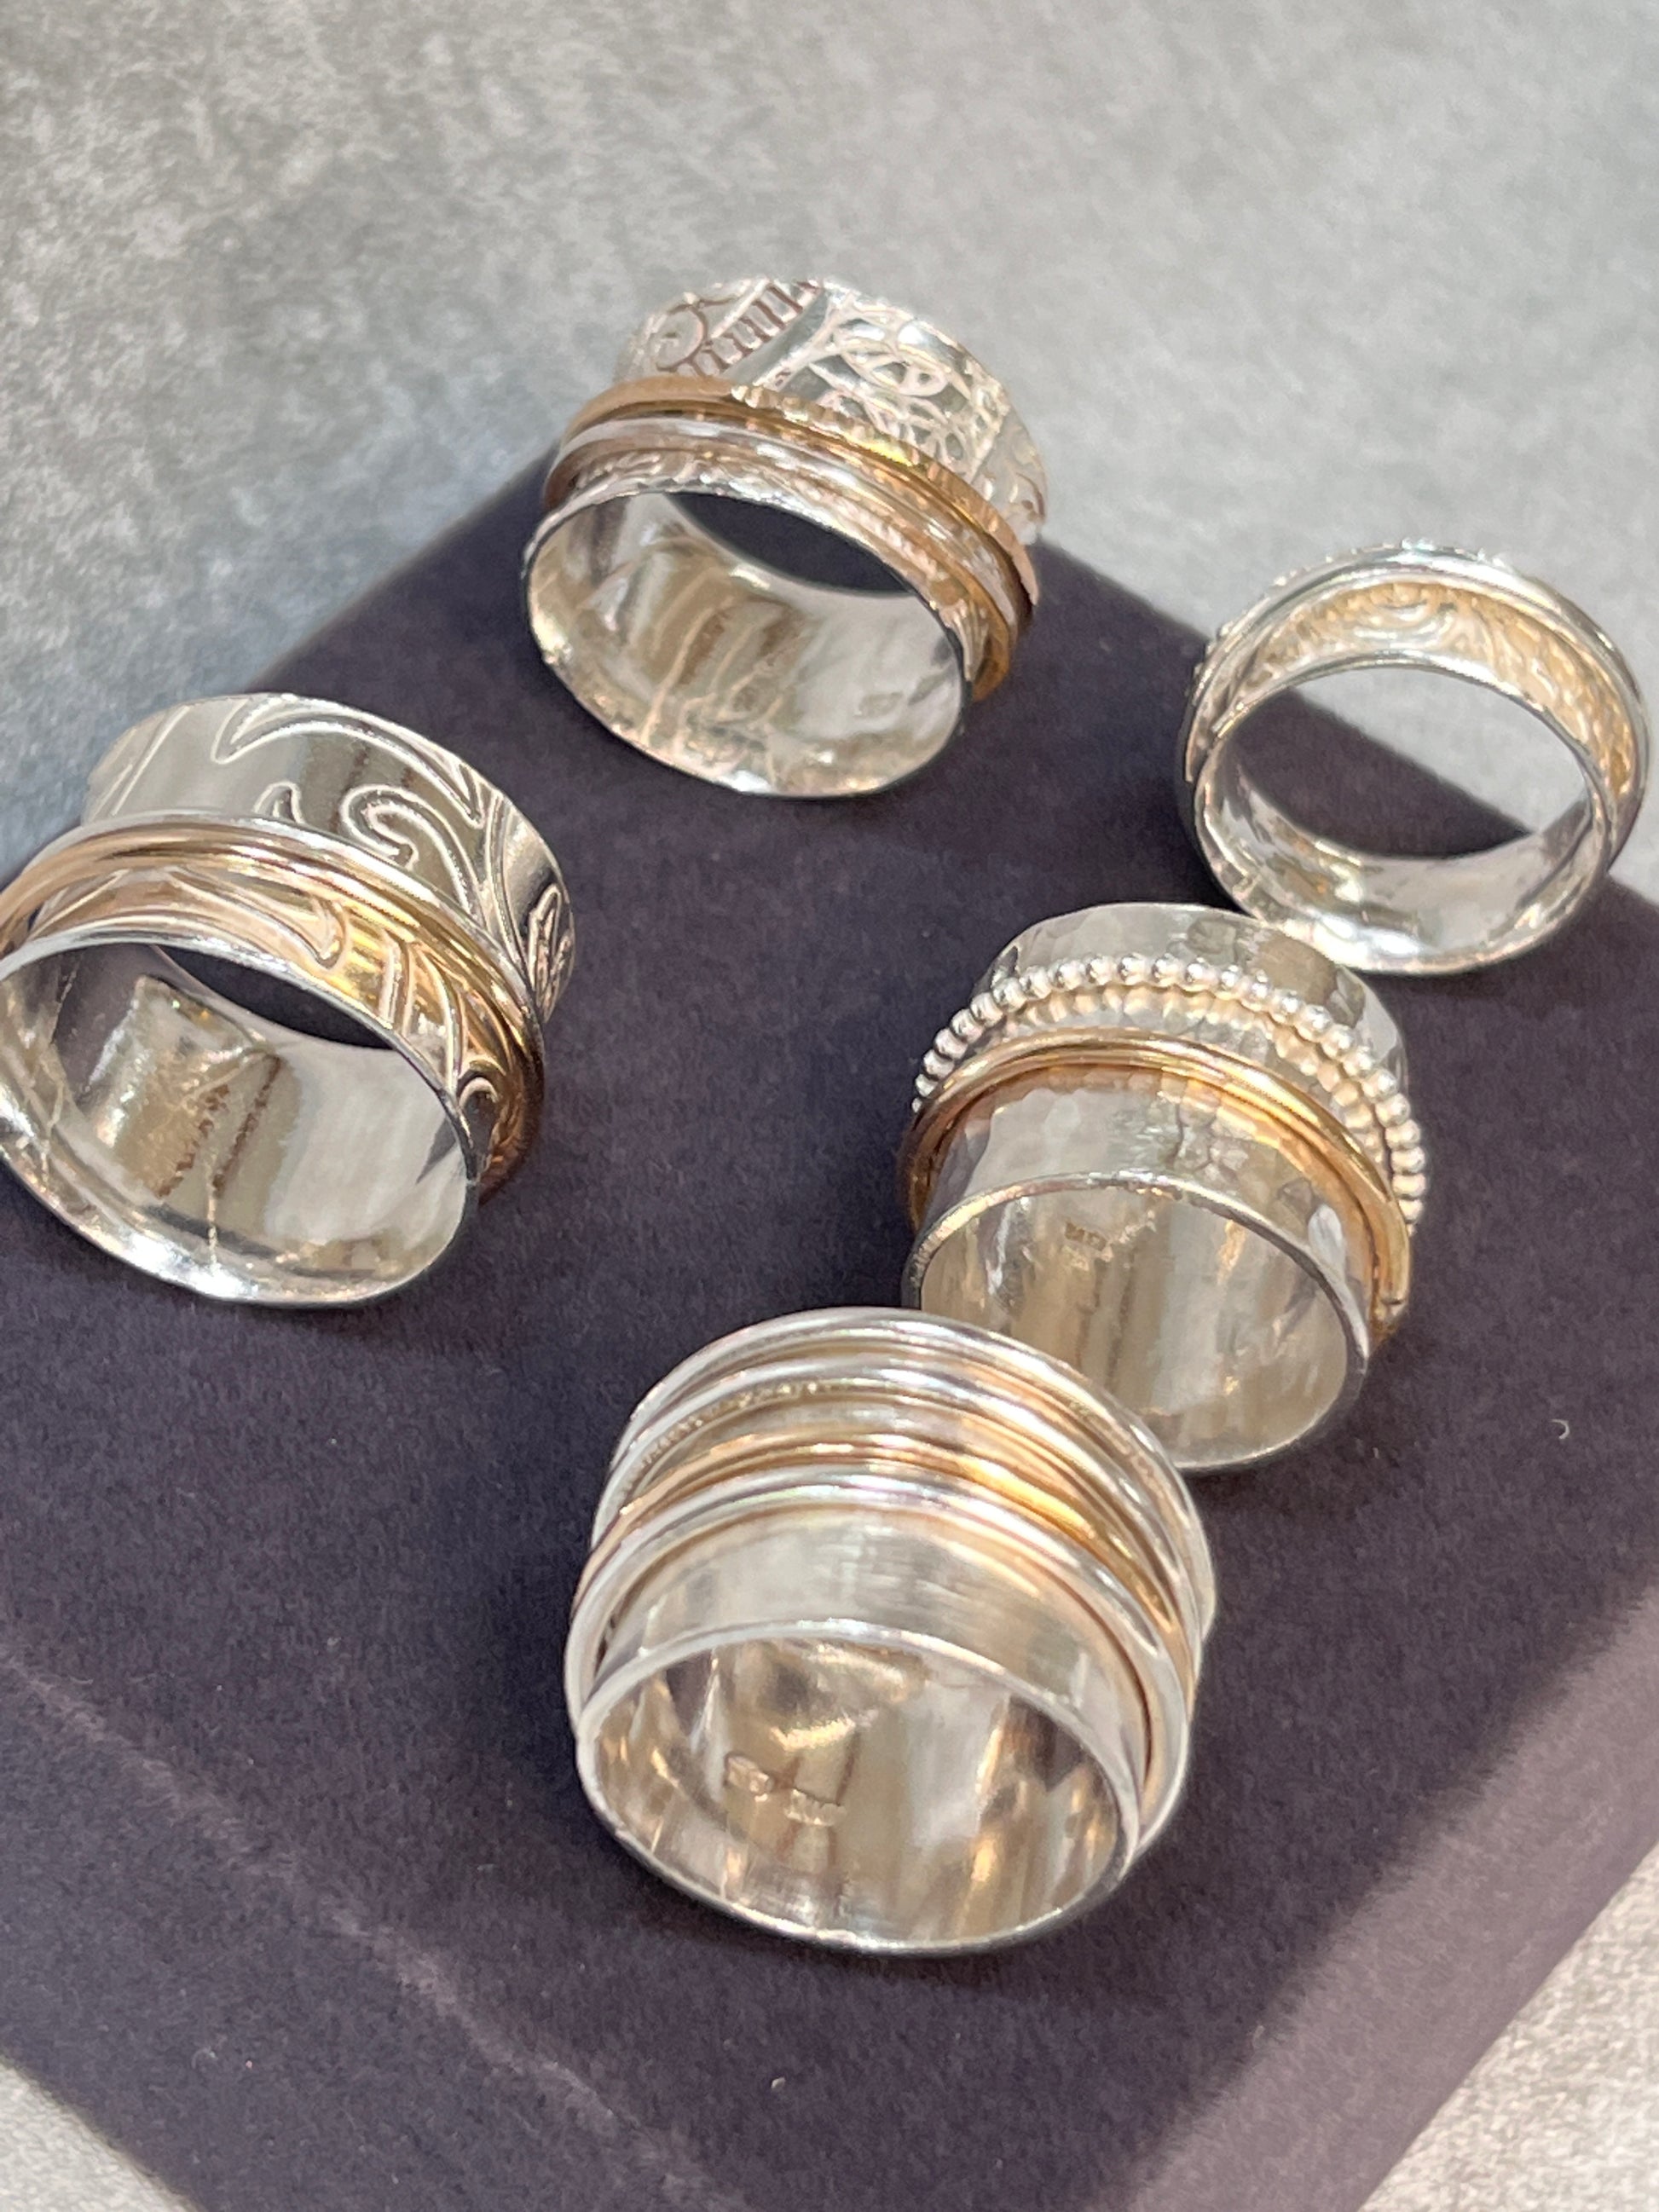 A collection of sterling silver spinner rings on a grey velvet base